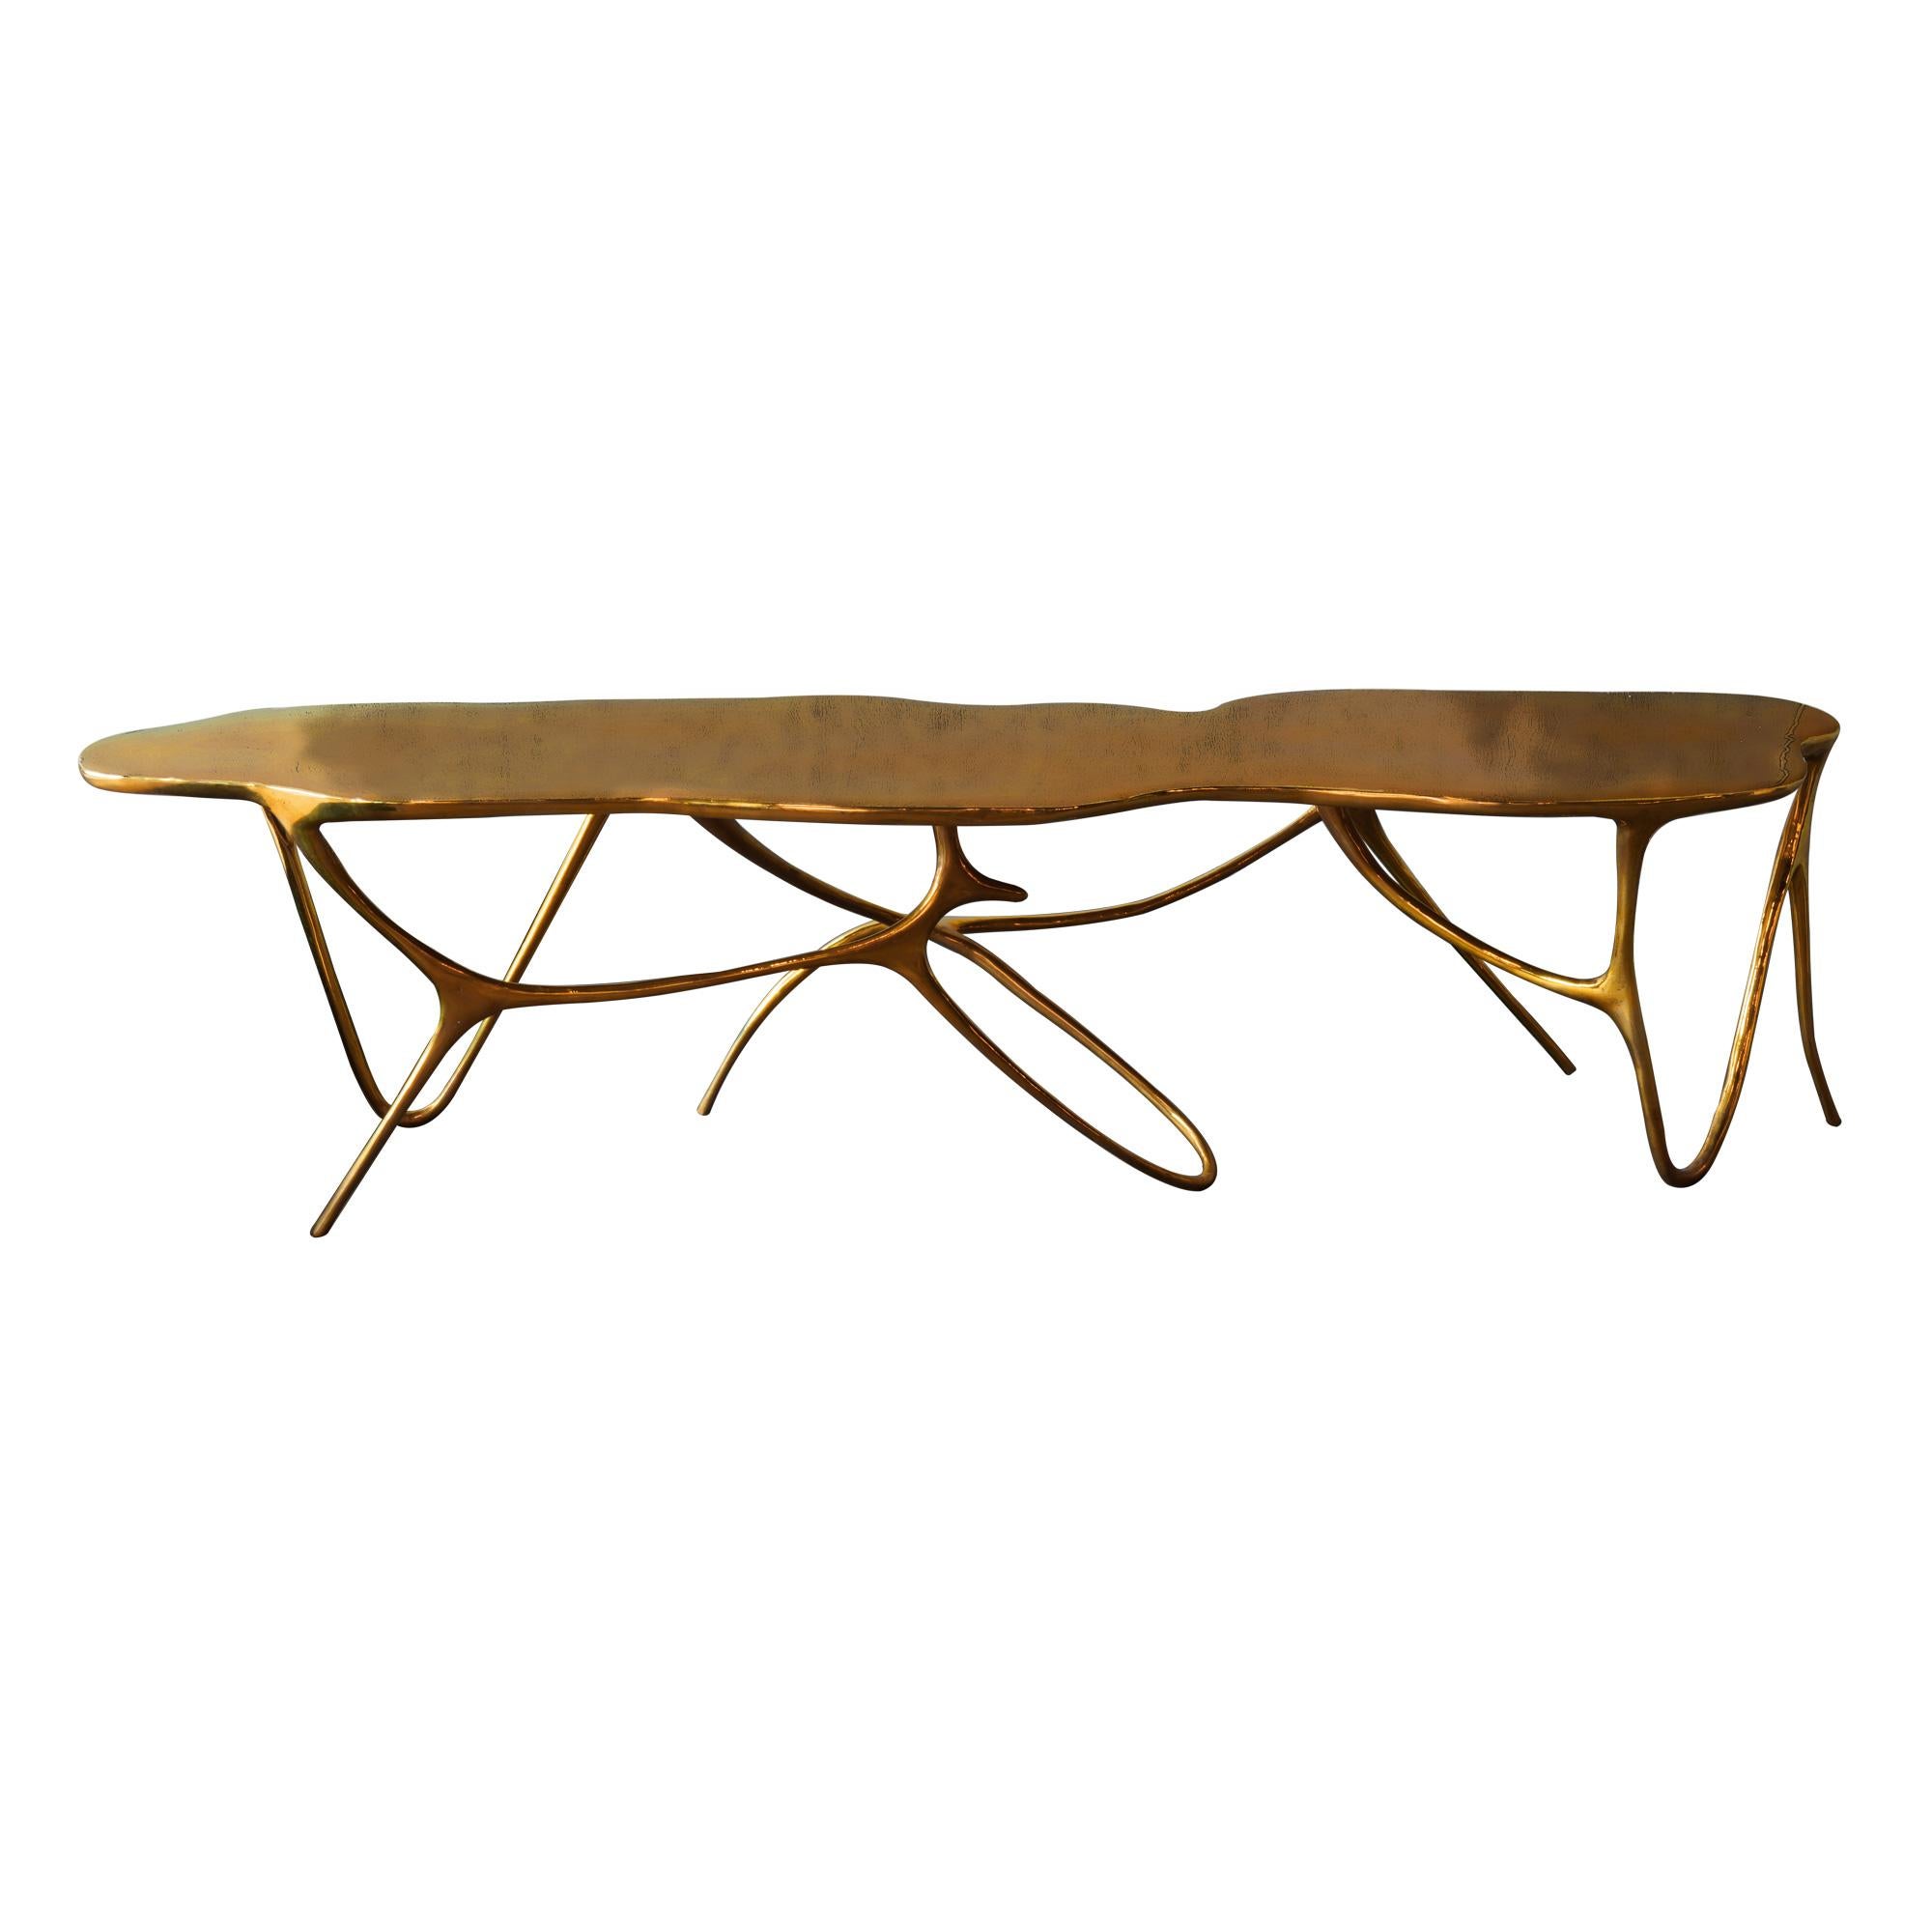 Elegant handcrafted bronze table or bench.
Can be customized to your specifications or COM.

Also available with an upholstered seat cushion.